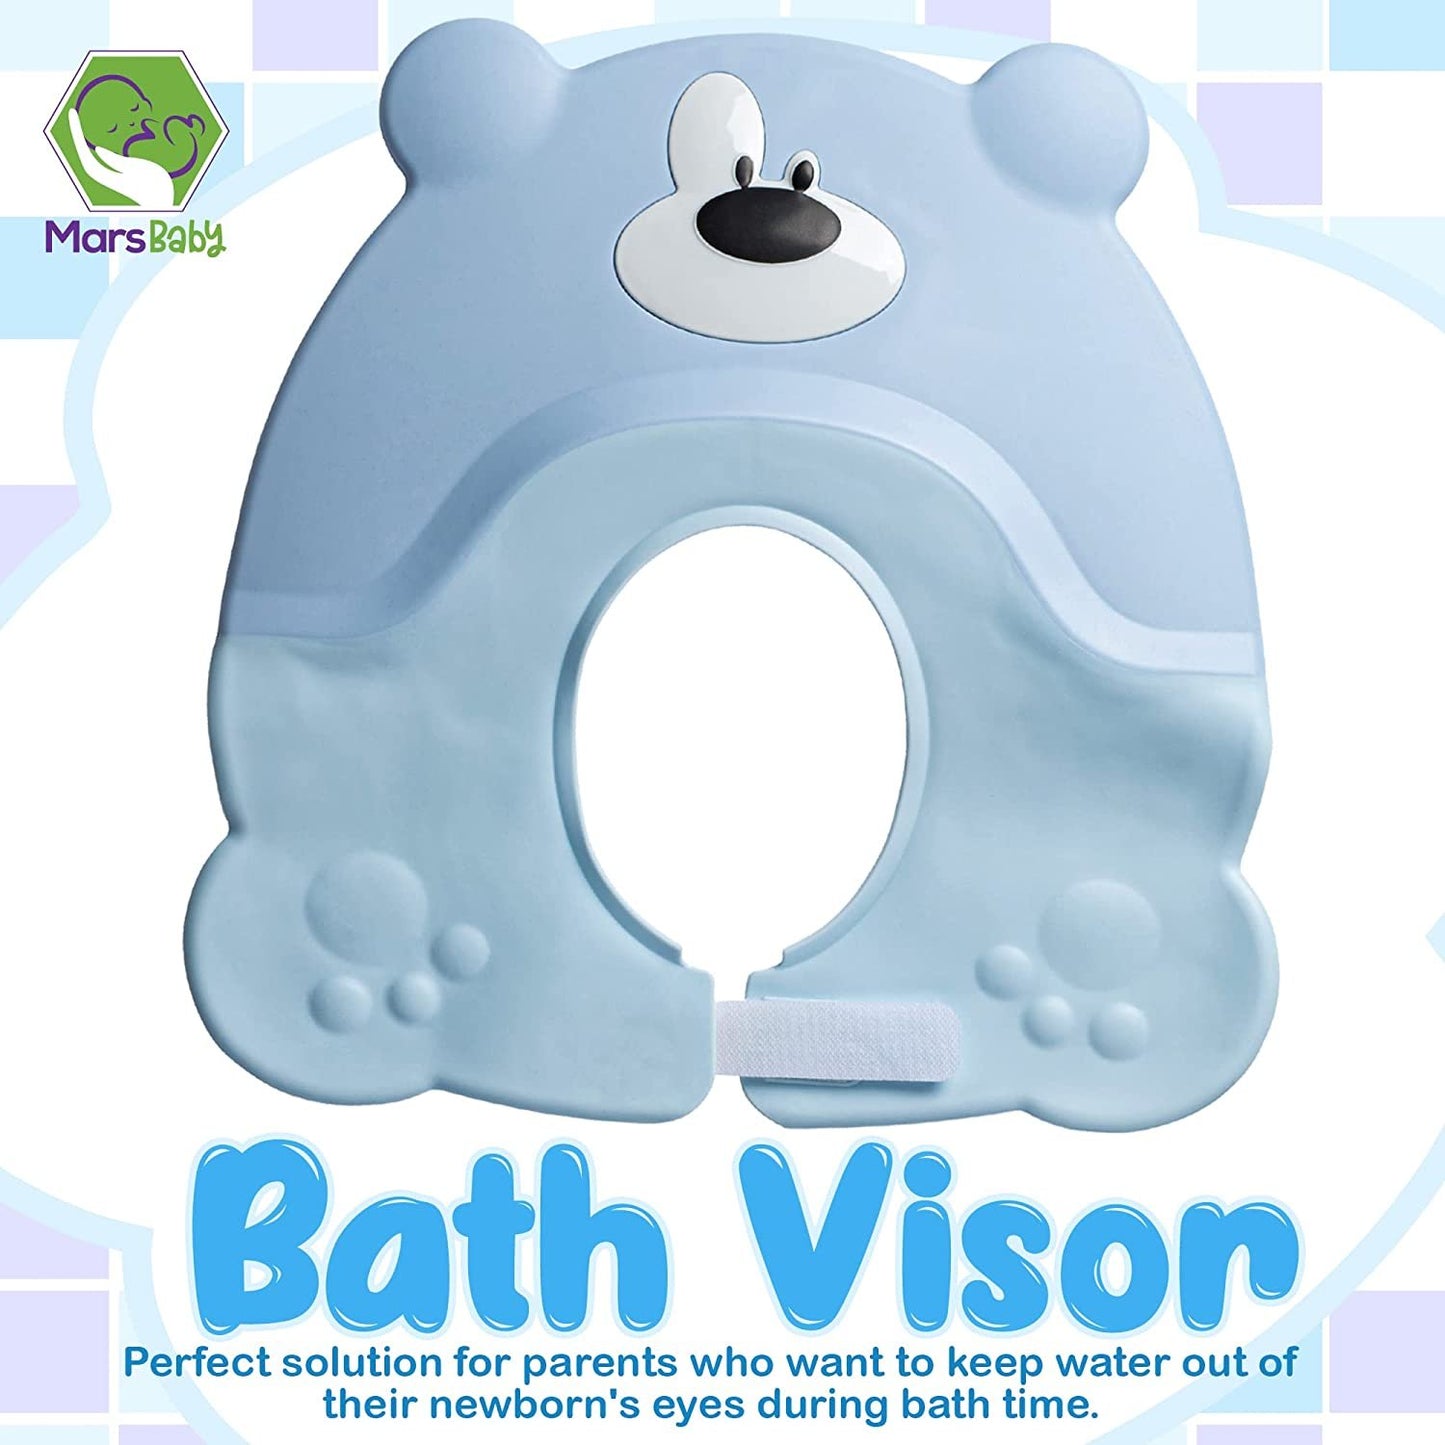 Mars Baby Shampoo Bath Visor - Bath Shower Cap Keeps Water Out of Babies Eyes During Bath Time - Adjustable Baby Shampoo Cap - Toddlers, Babies, Children